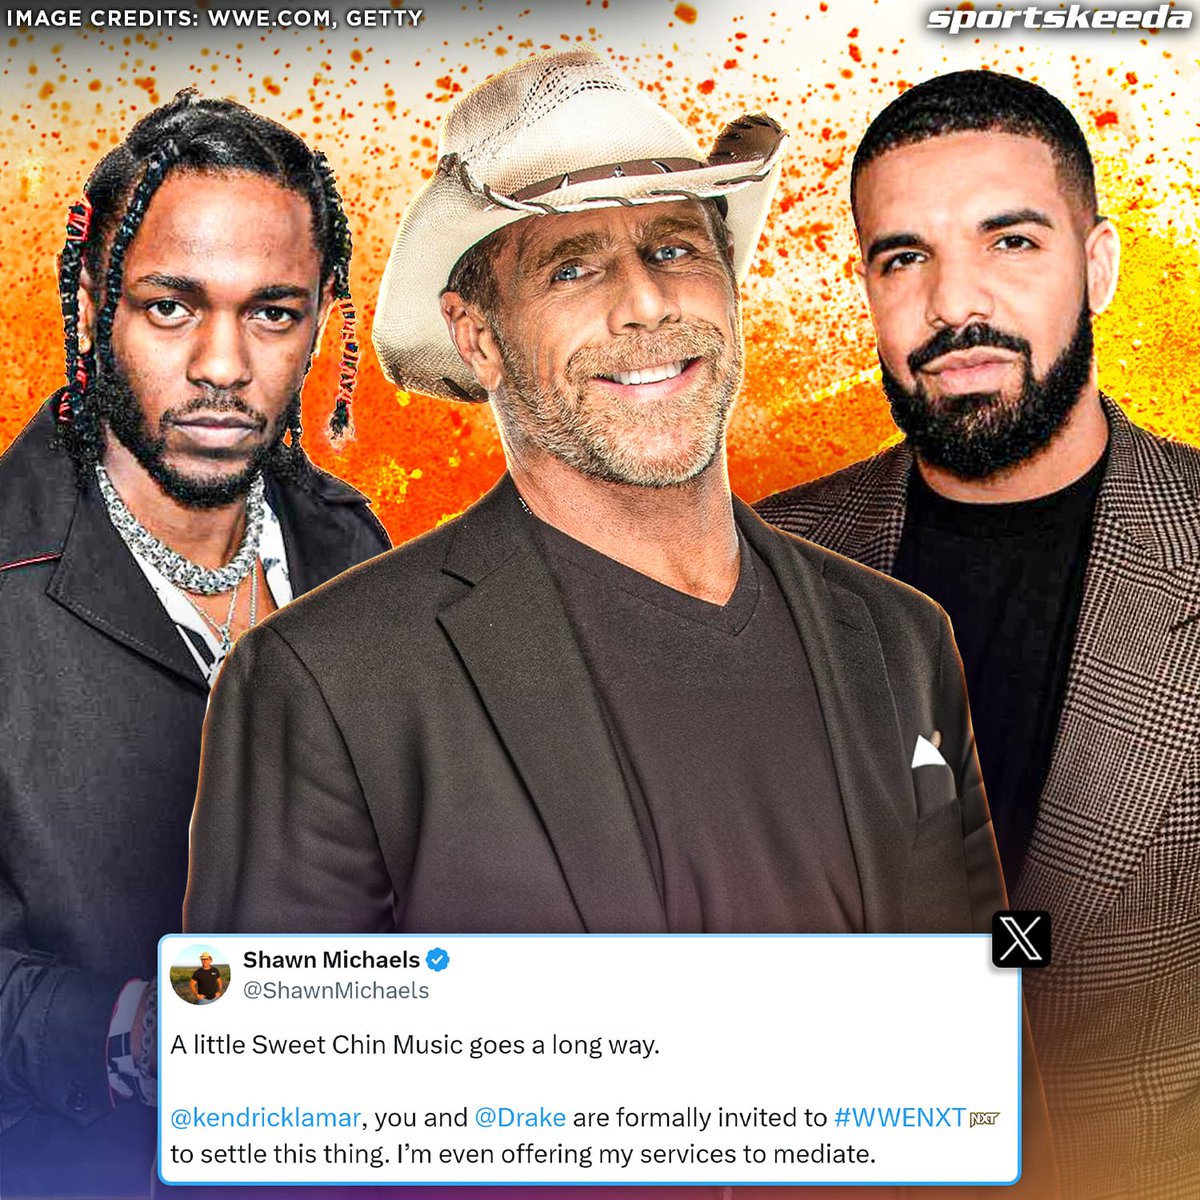 #ShawnMichaels' NXT might just be the perfect place for #Drake and #KendrickLamar to settle their beef. 
#WWE #WWENXT